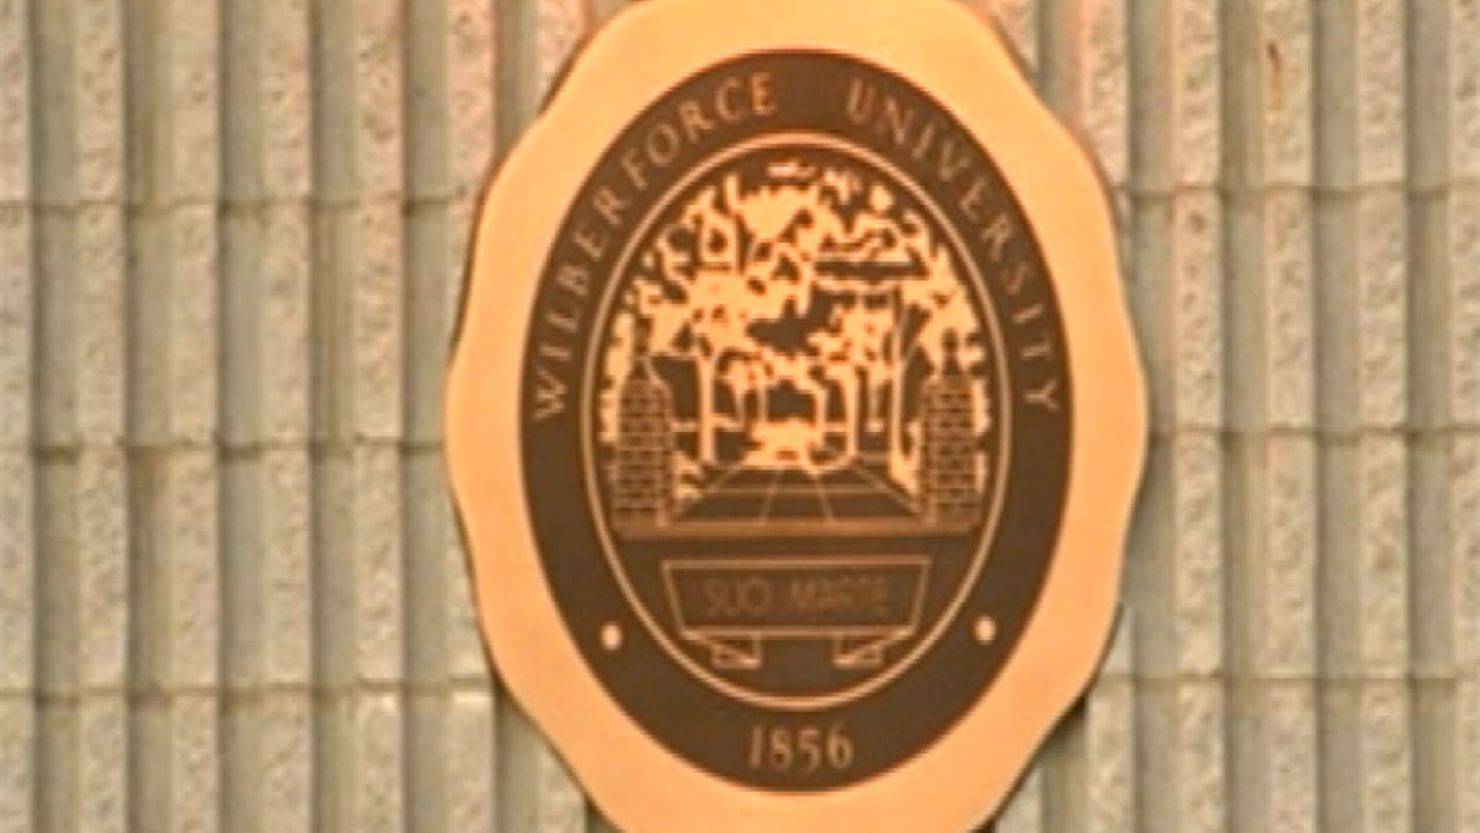 wilberforce university WHIO